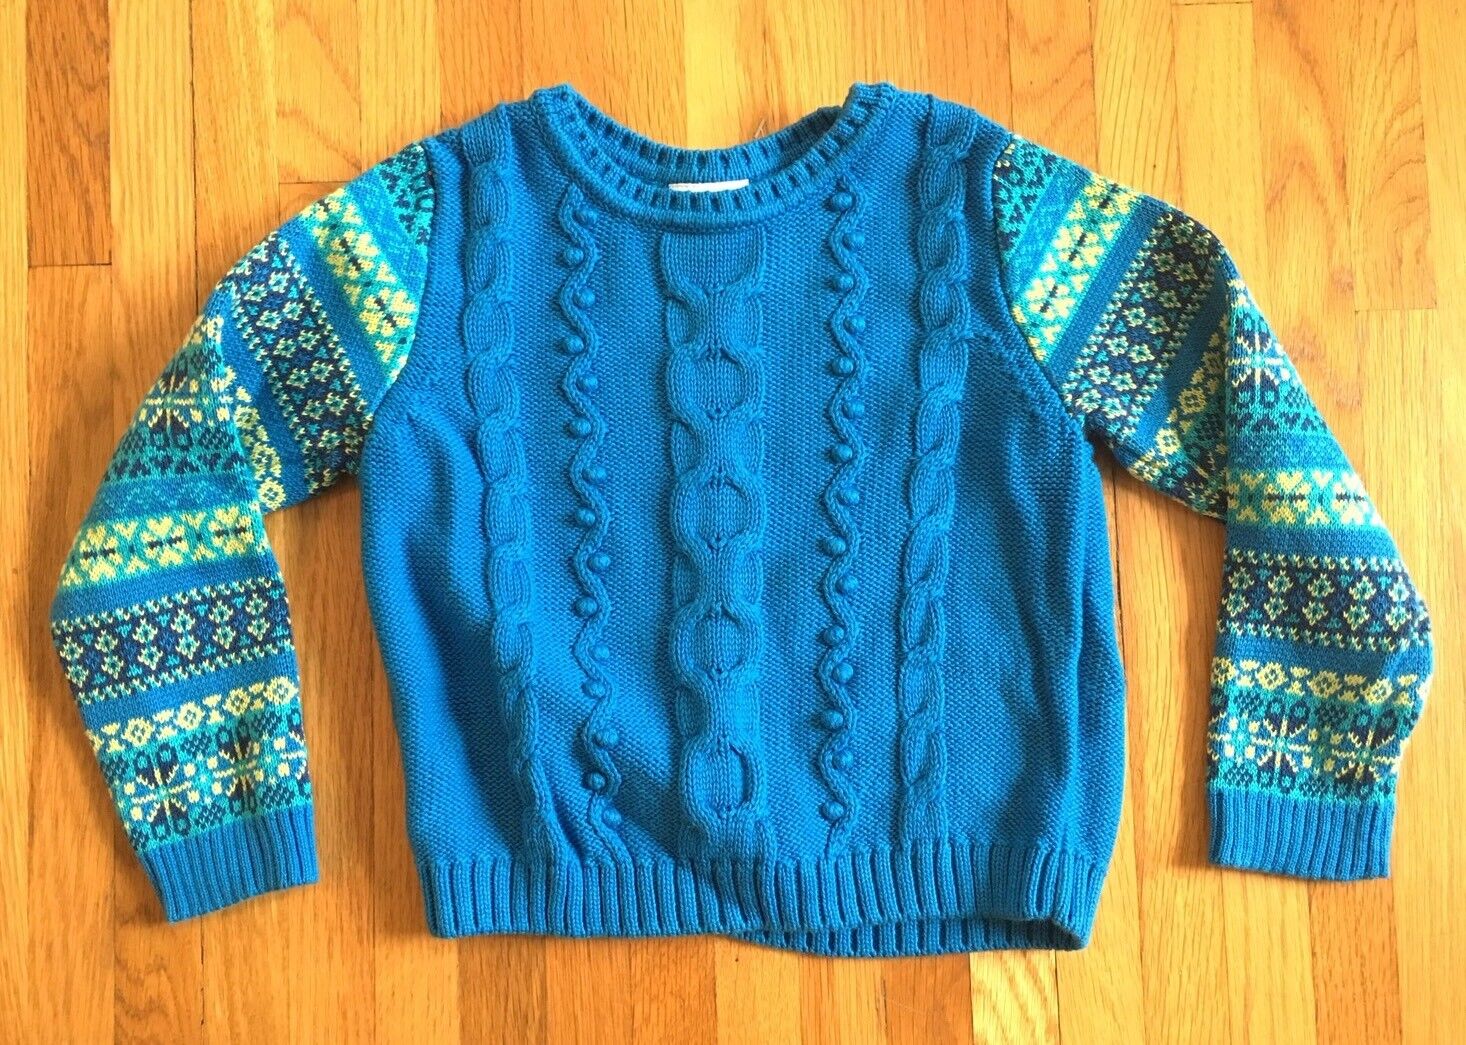 Girl's HANNA ANDERSSON Cable Knit Sweater / Blue Cotton / Size 110 Size 5